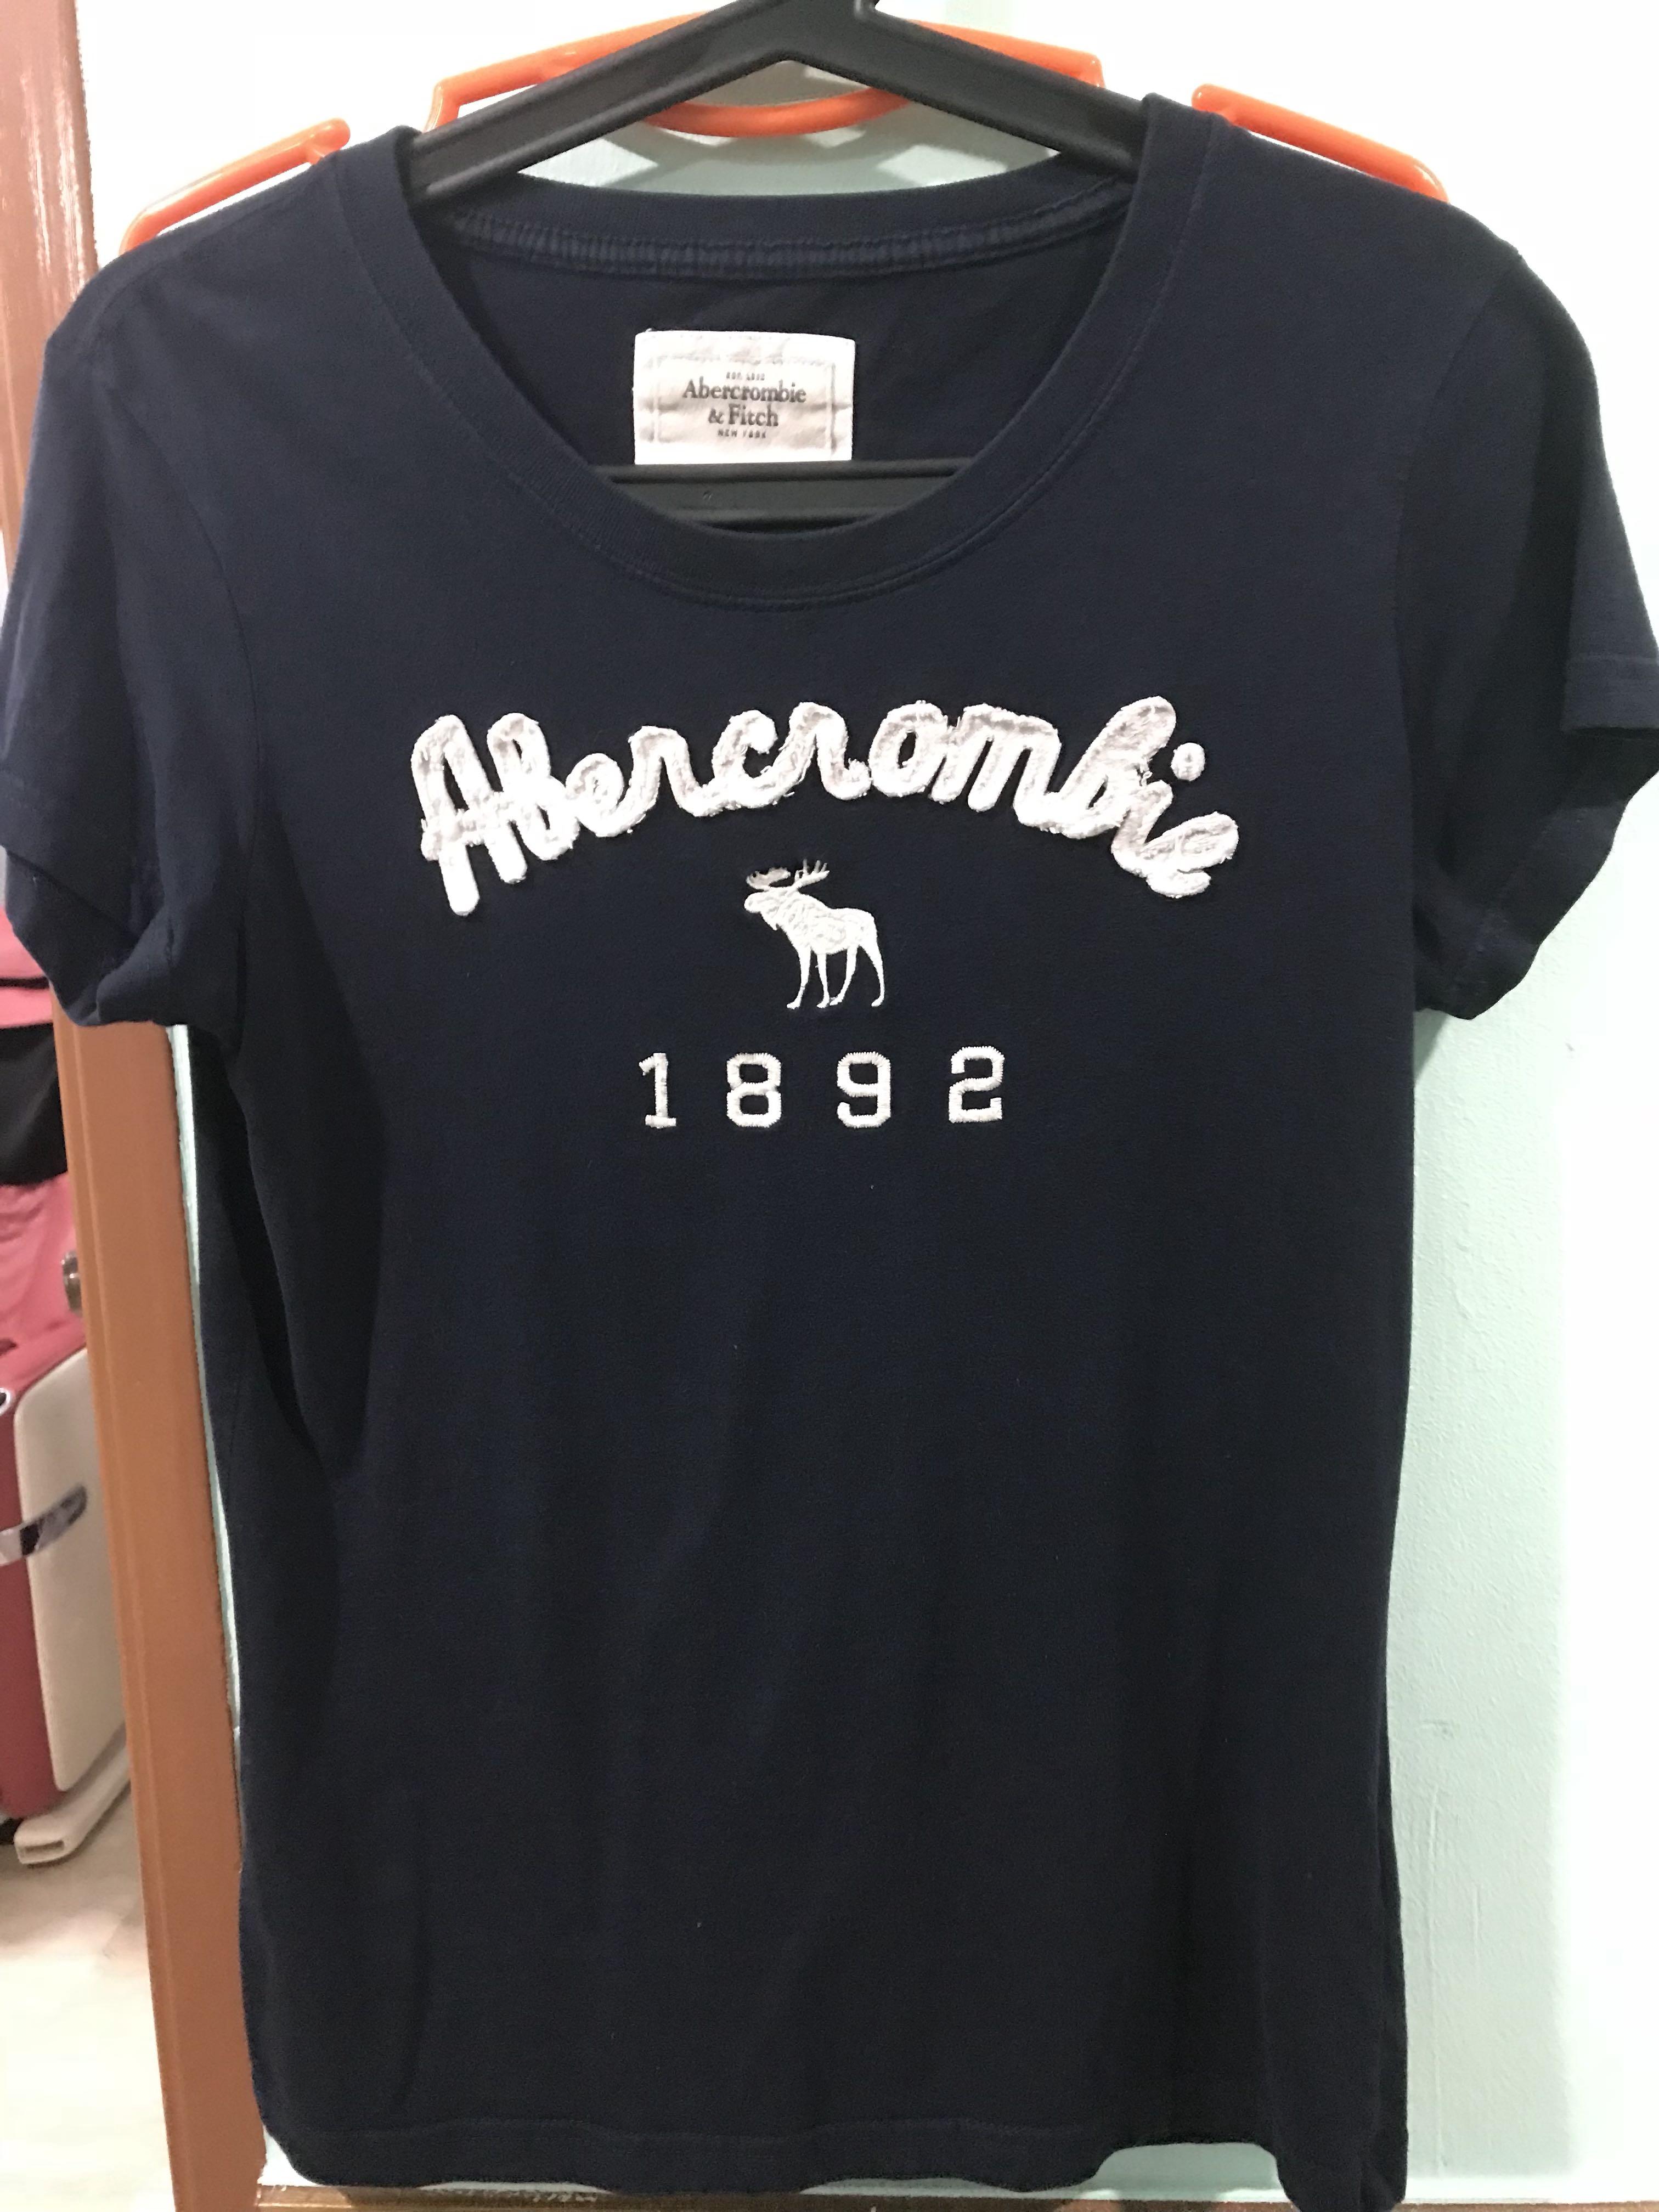 abercrombie & fitch t shirts womens